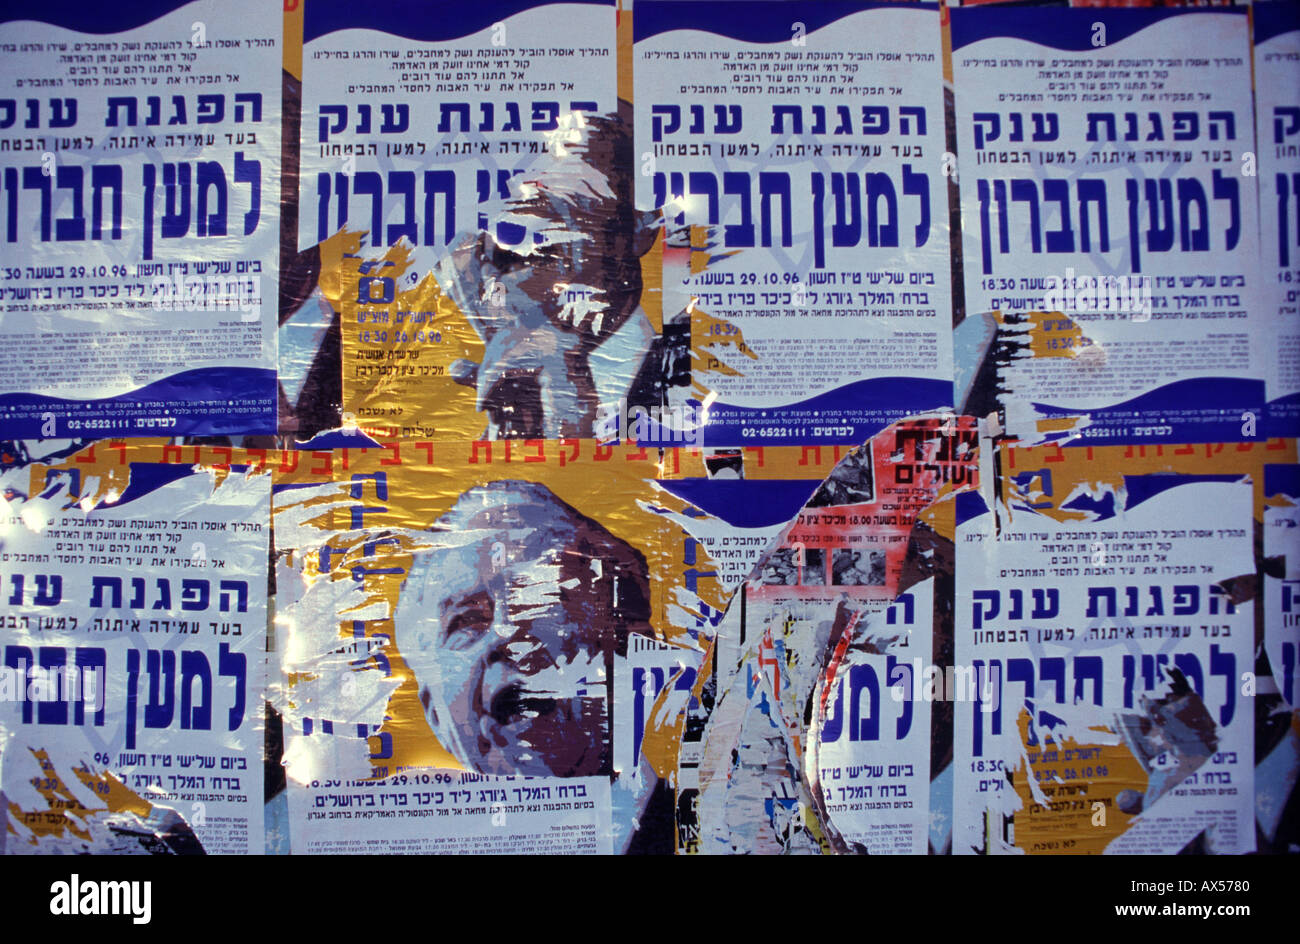 Torn placard figure of Prime Minister Yitzhak Rabin with posters calling for right wing rally supporting Jewish settlement in Hebron, Jerusalem Israel Stock Photo